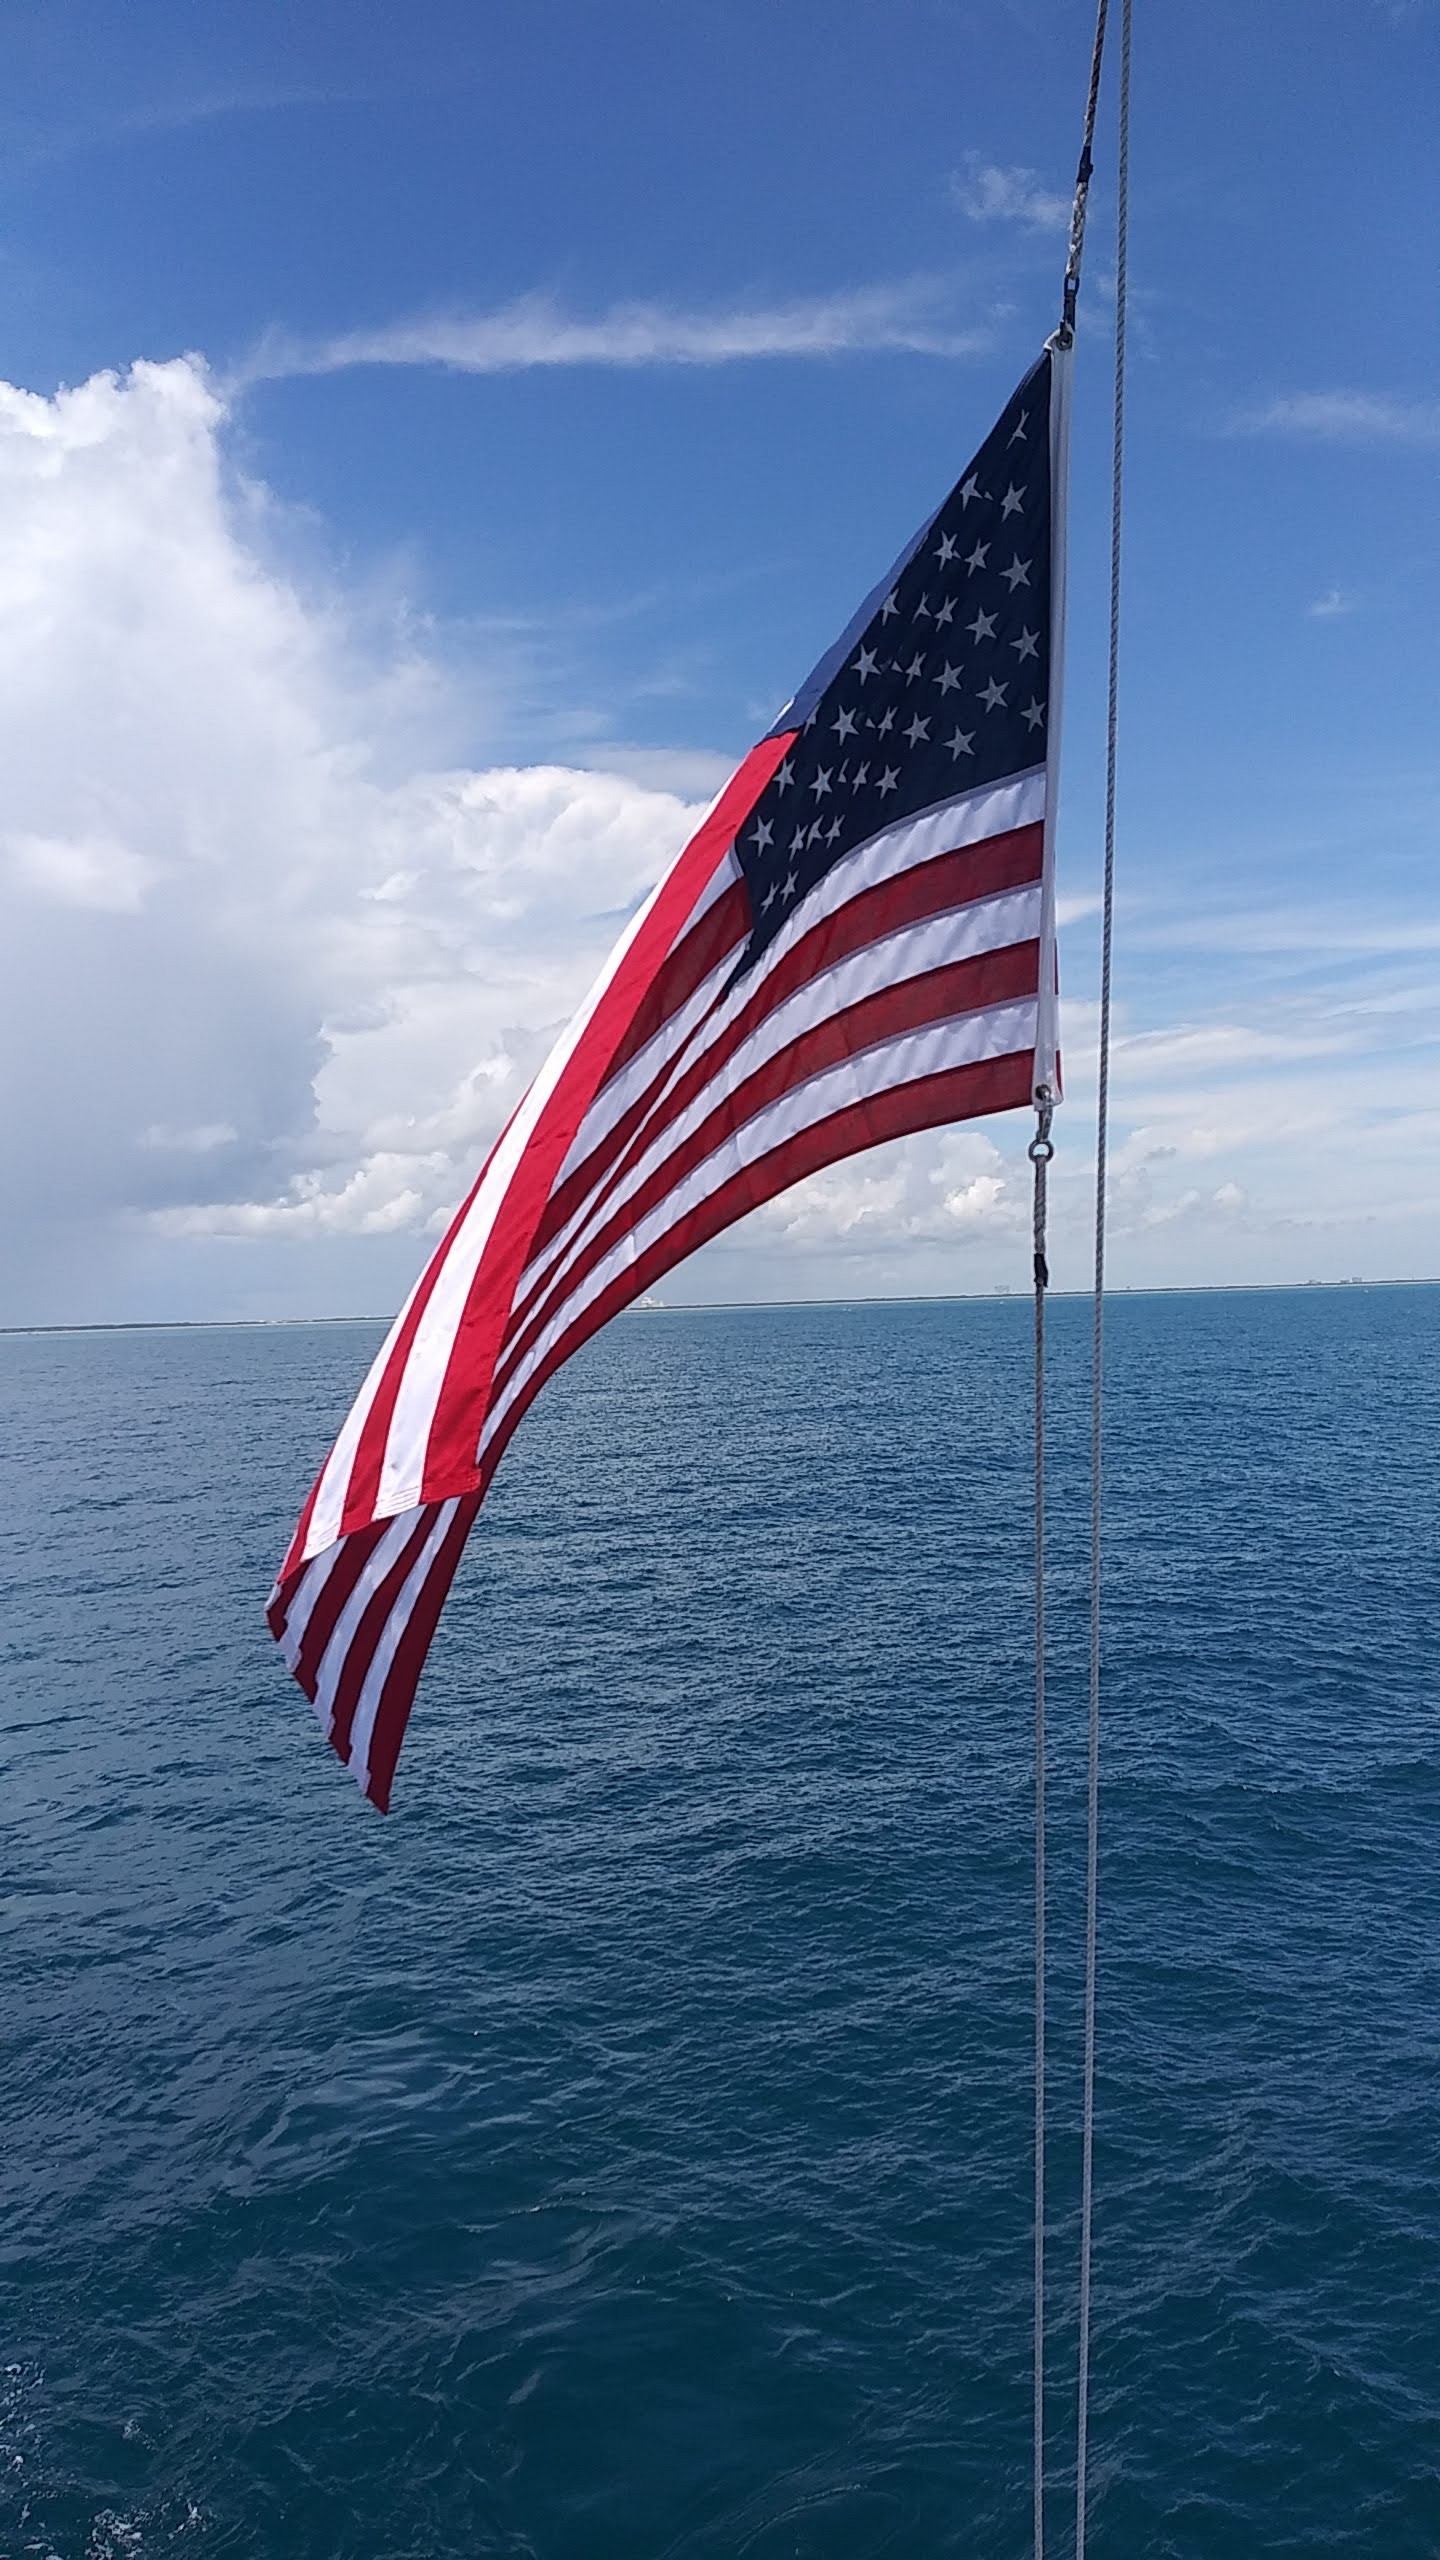 United States Flag on a boat 6